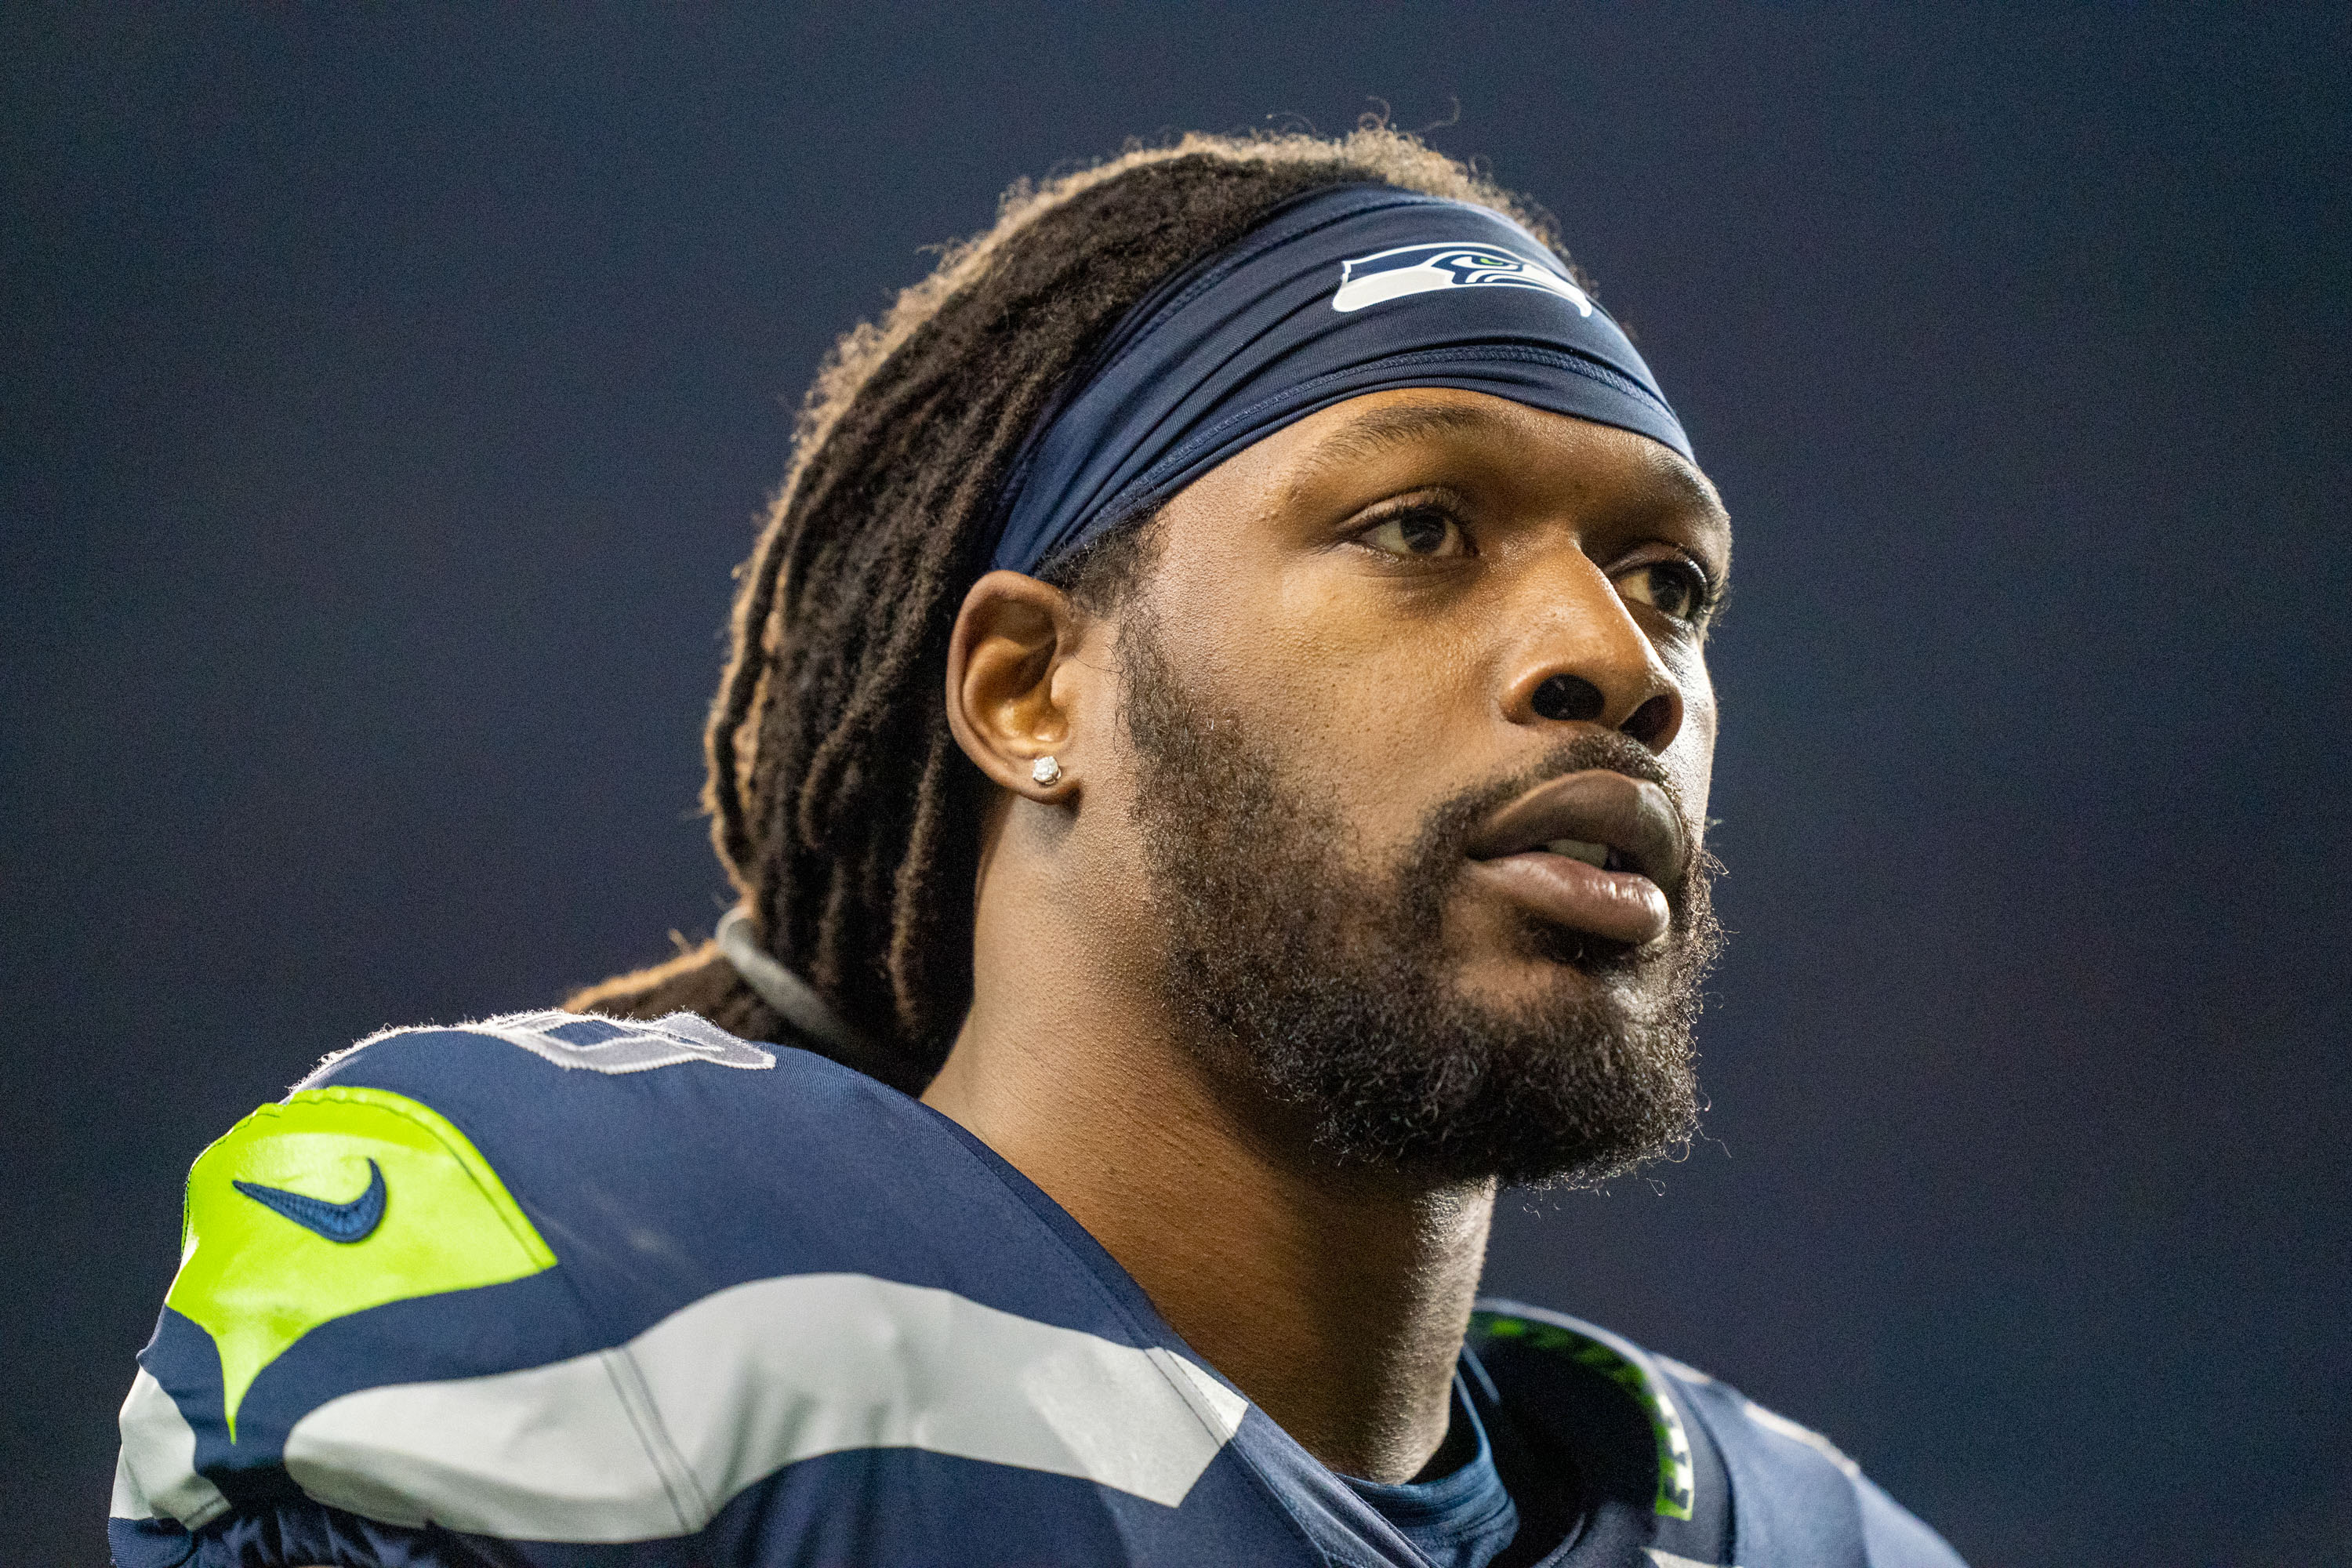 Jadeveon Clowney's list of potential suitors continues to grow